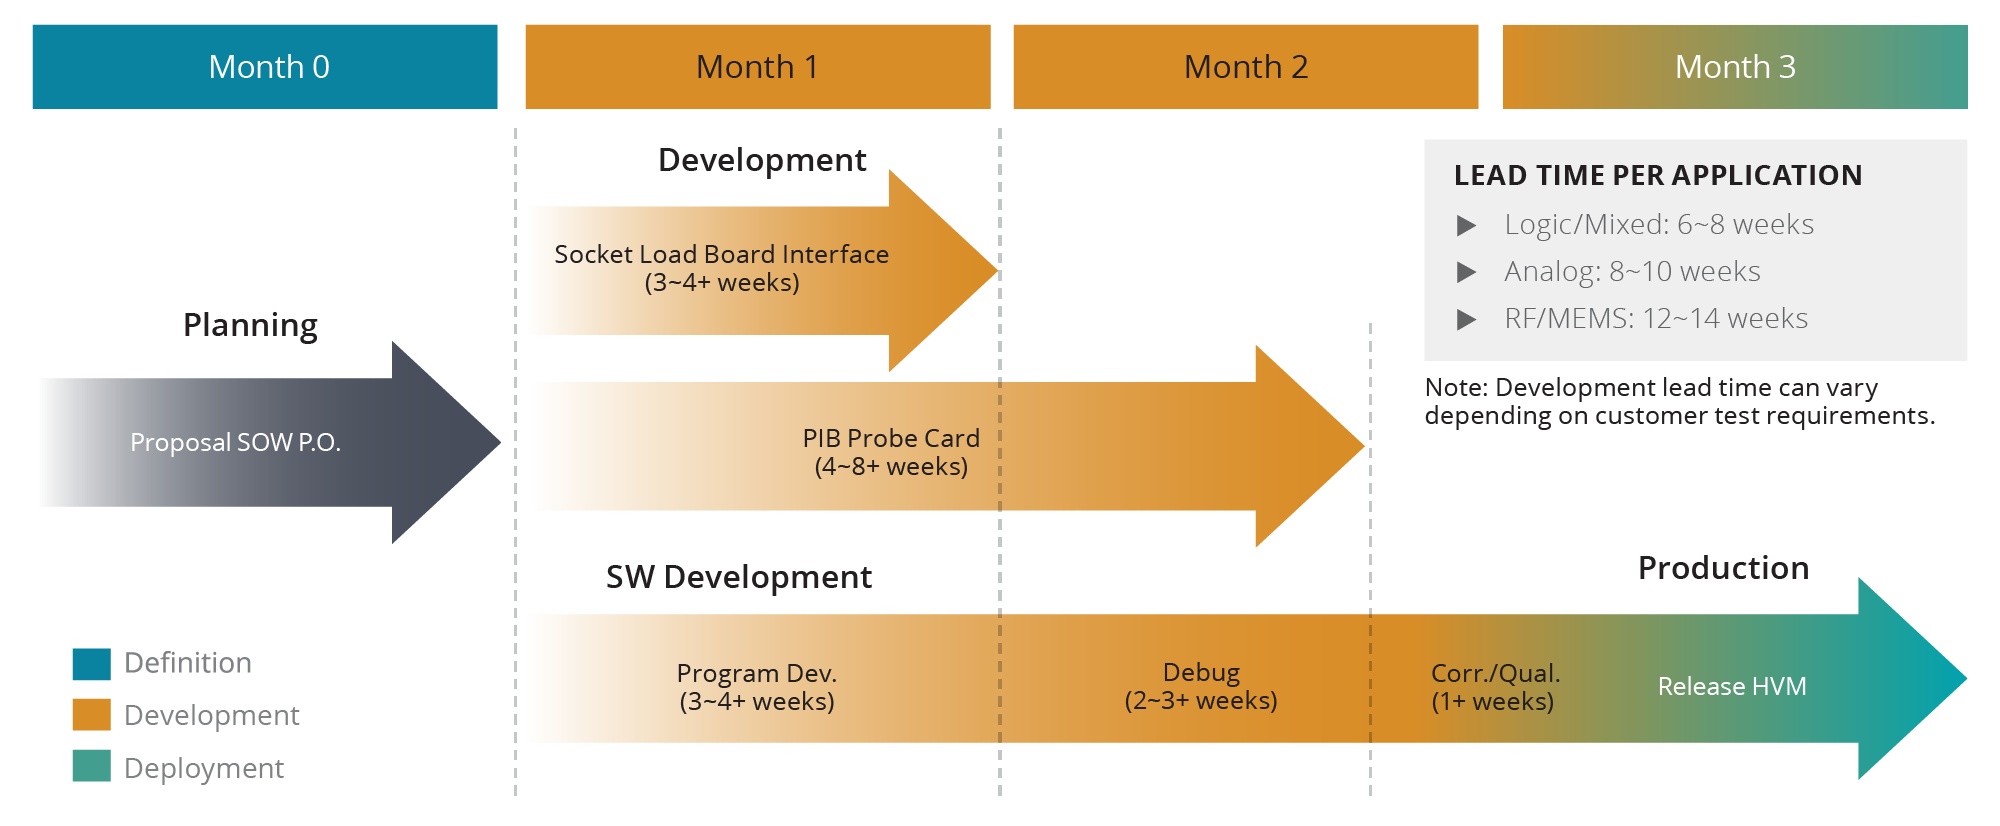 Diagram showing Test Development Cycle Times